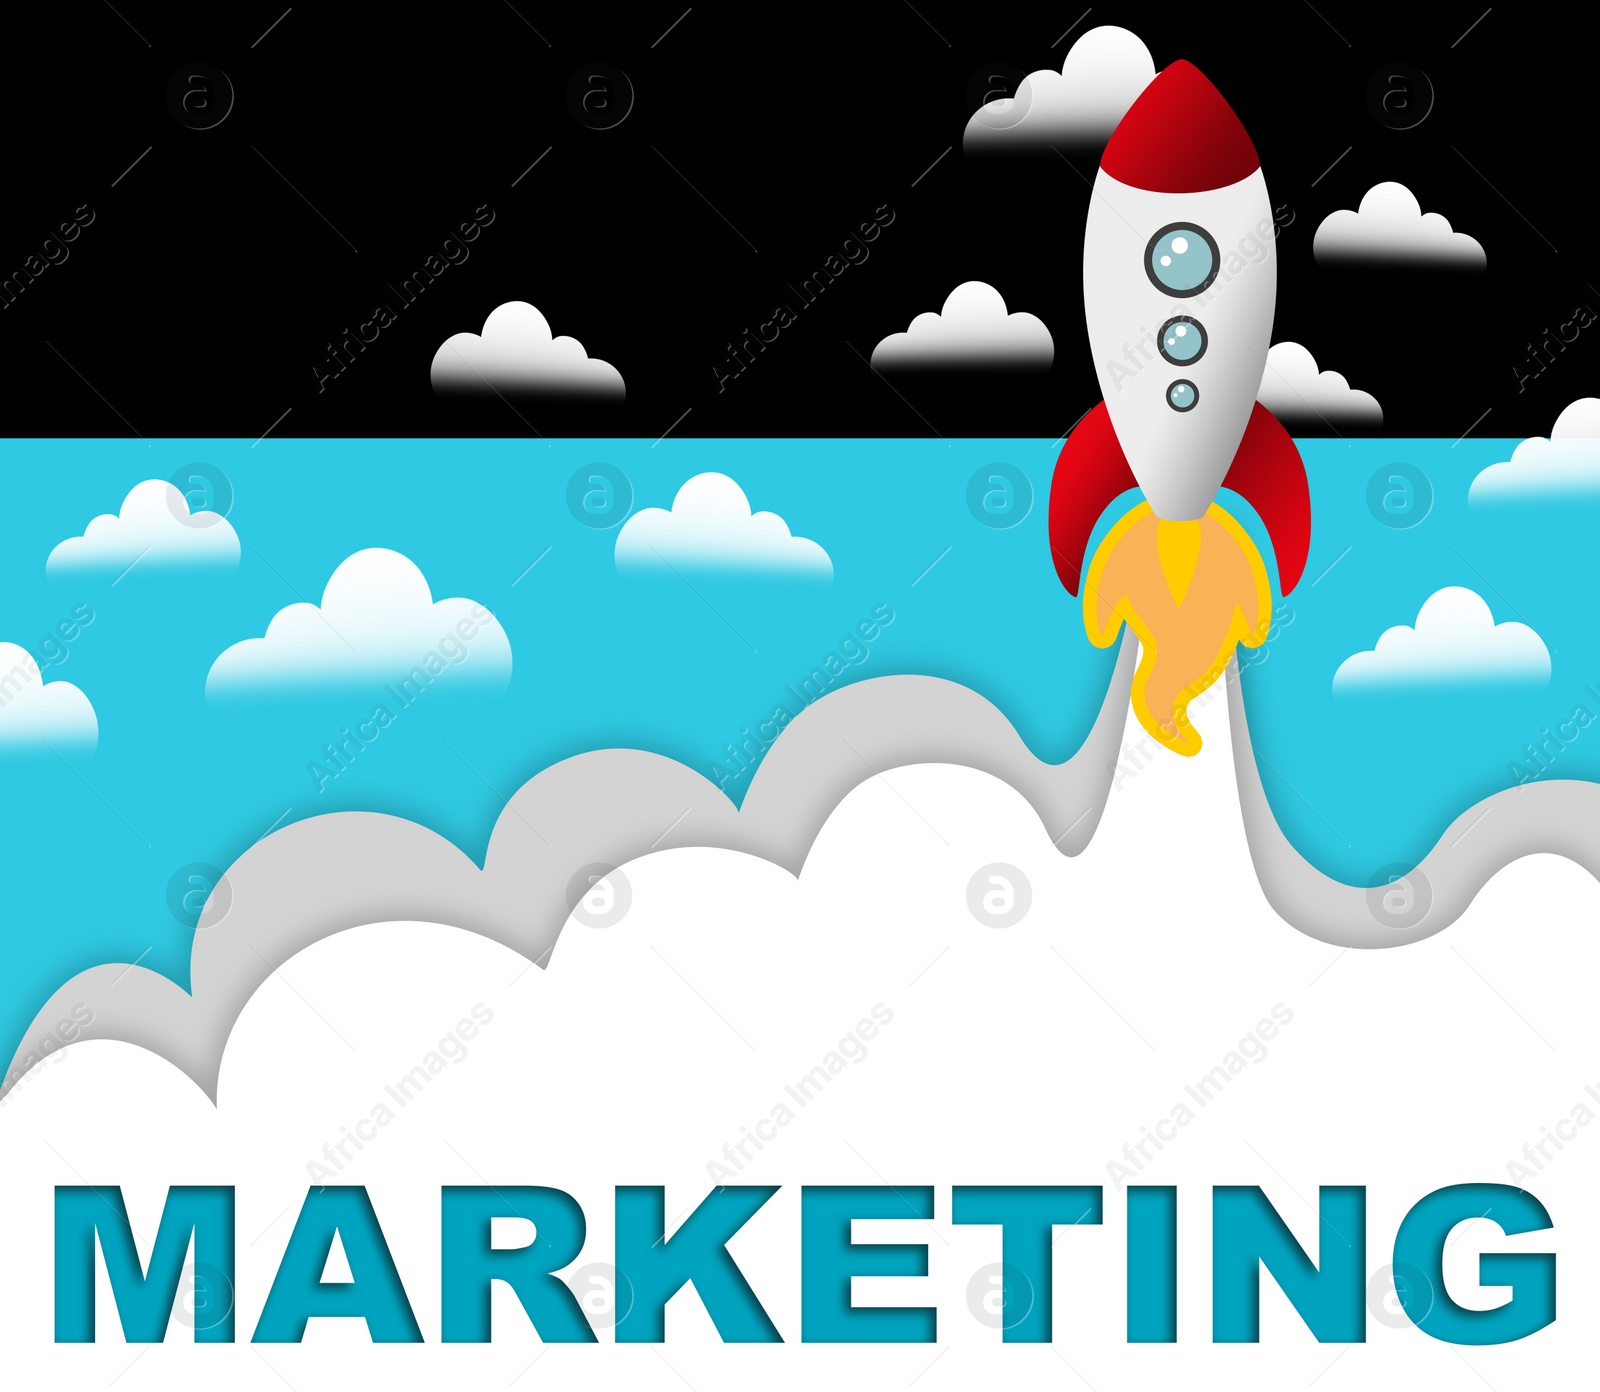 Illustration of Digital marketing strategy.  rocket and clouds on color background